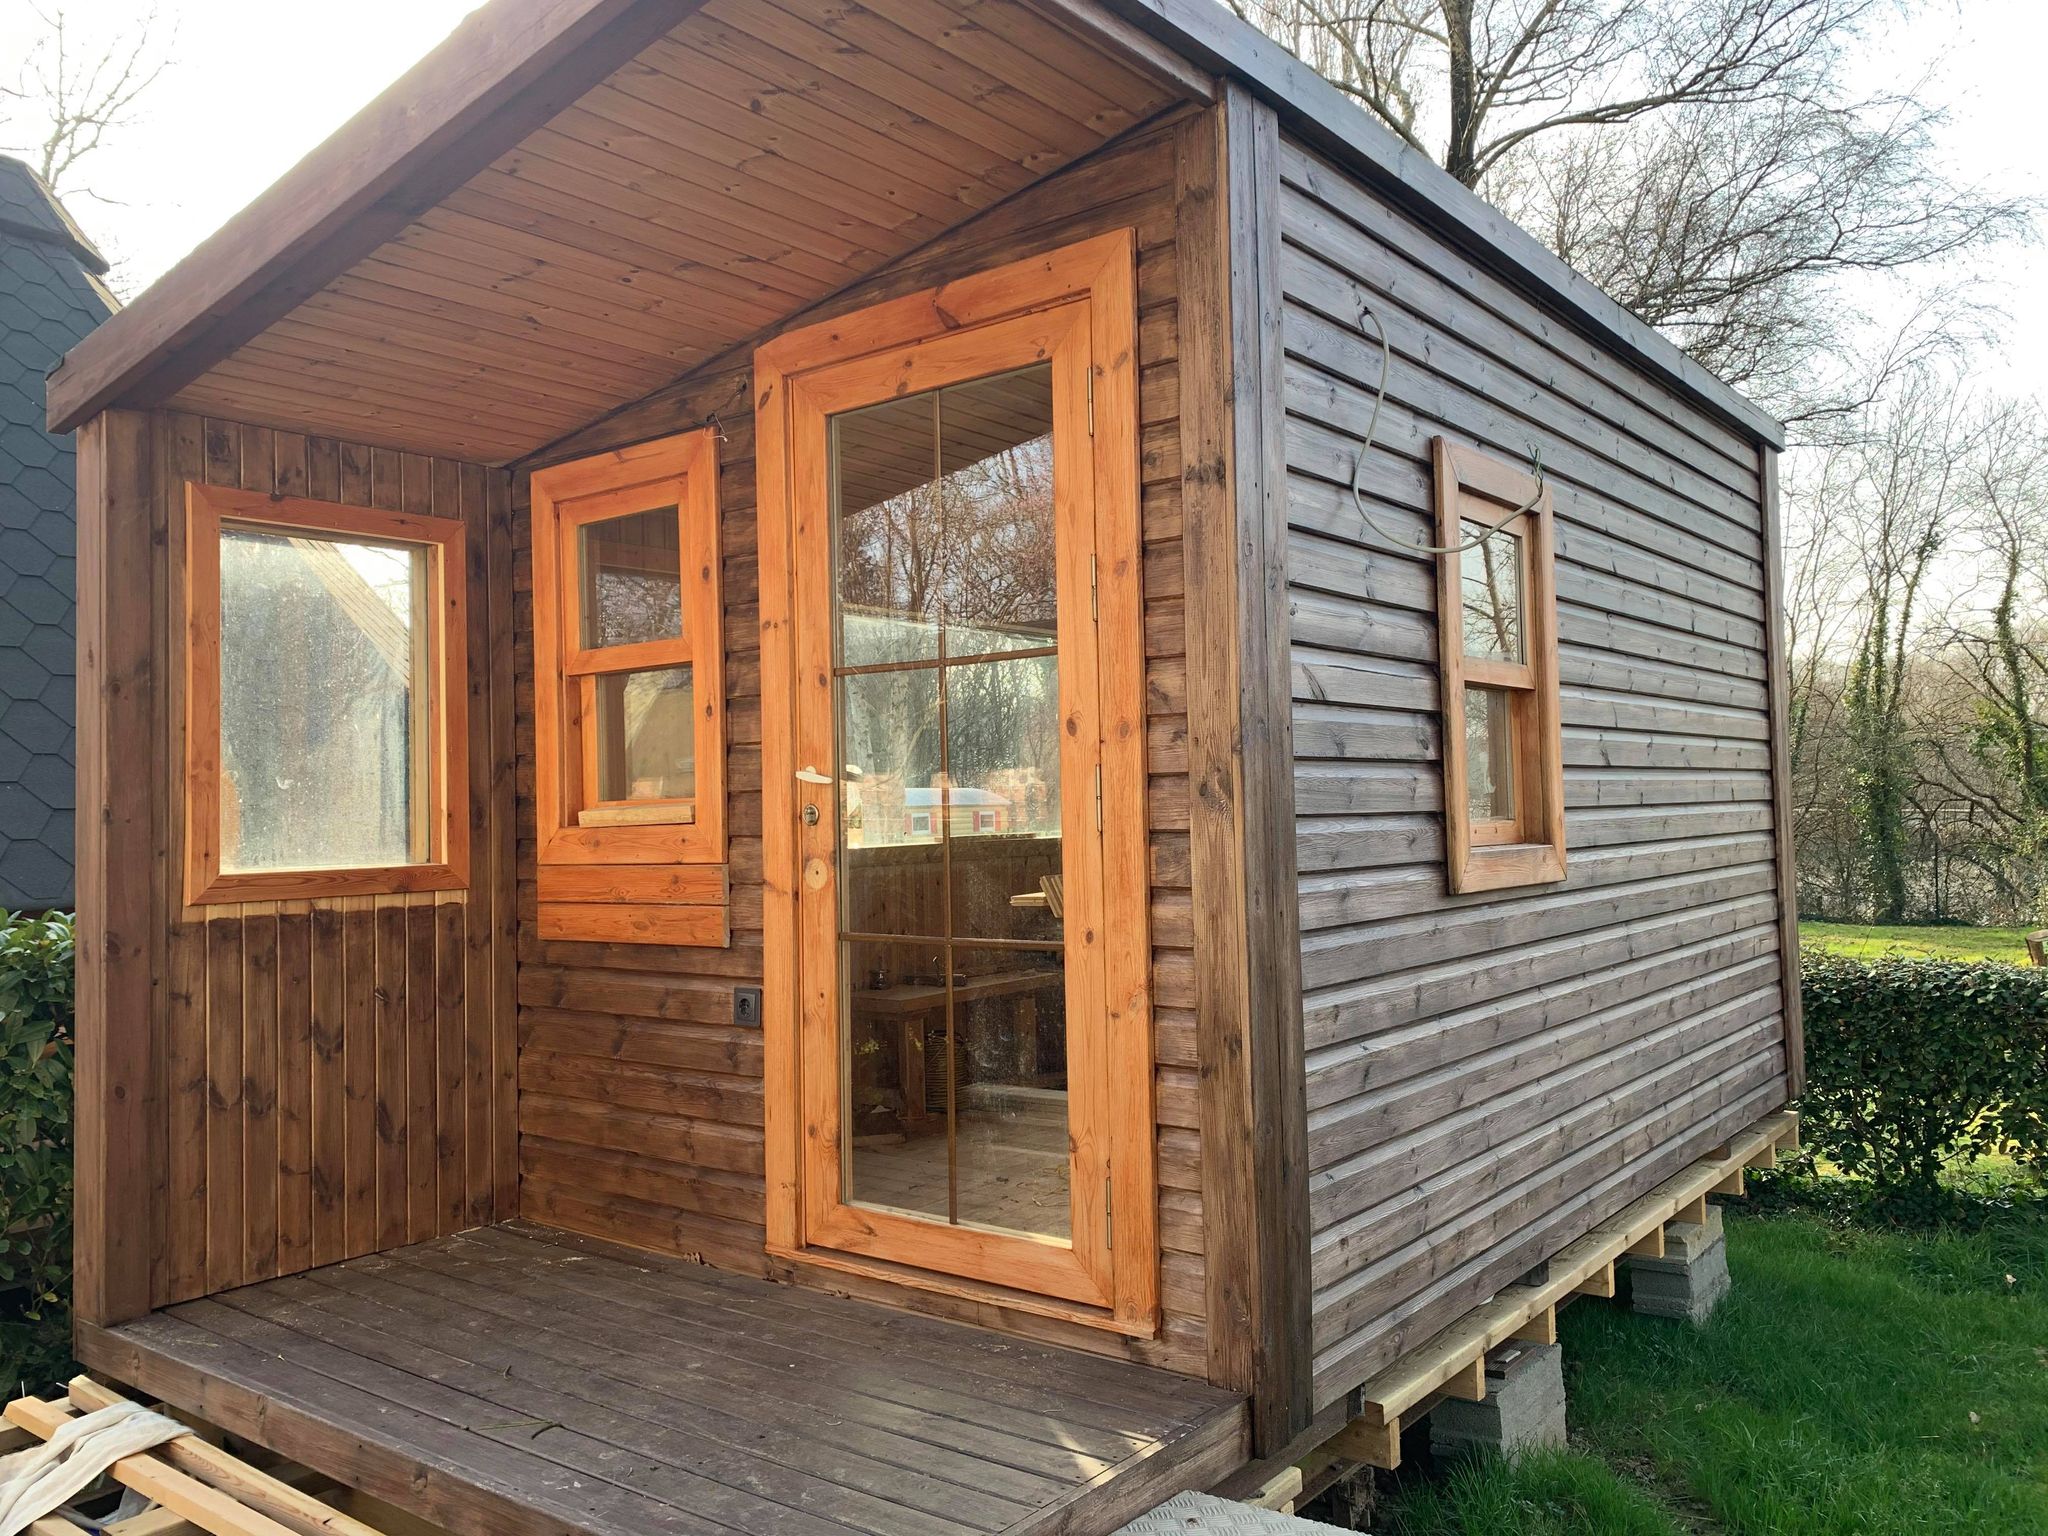 Accommodation - Cabin Cube 2 Pers. 1 Double Bed - With Bathroom And Toilet - Camping L'Étang du Pays Blanc